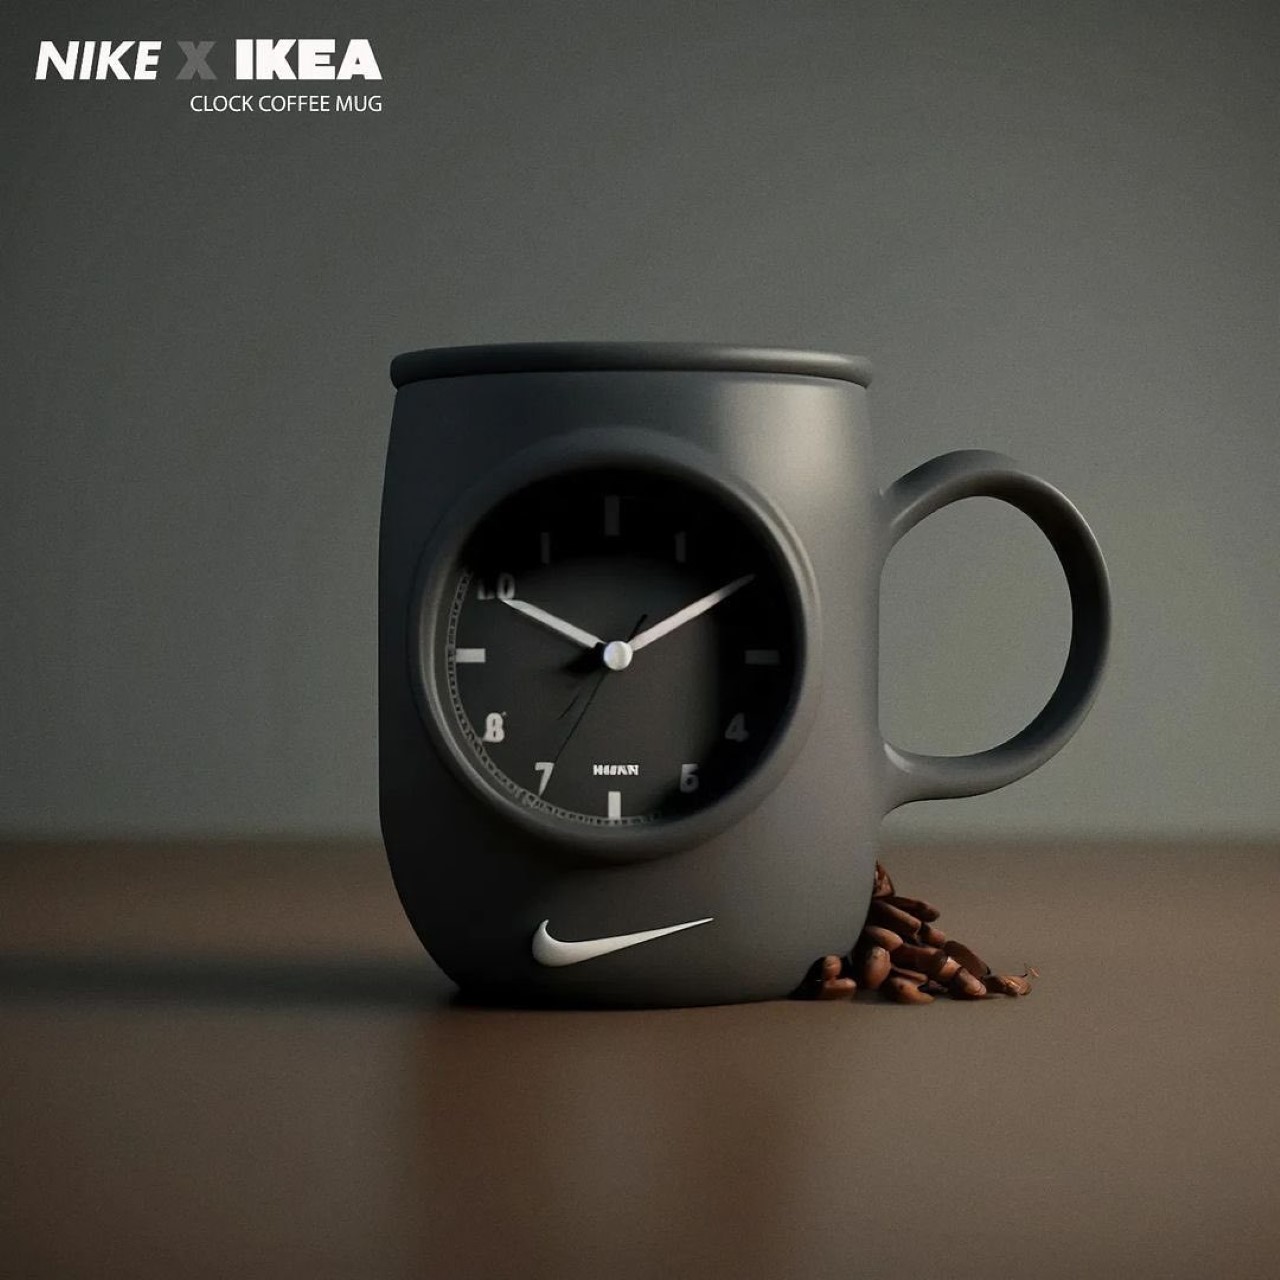 The Ultimate Nike x IKEA Mashup: These Sporty Home Decor Items Were Created by an AI